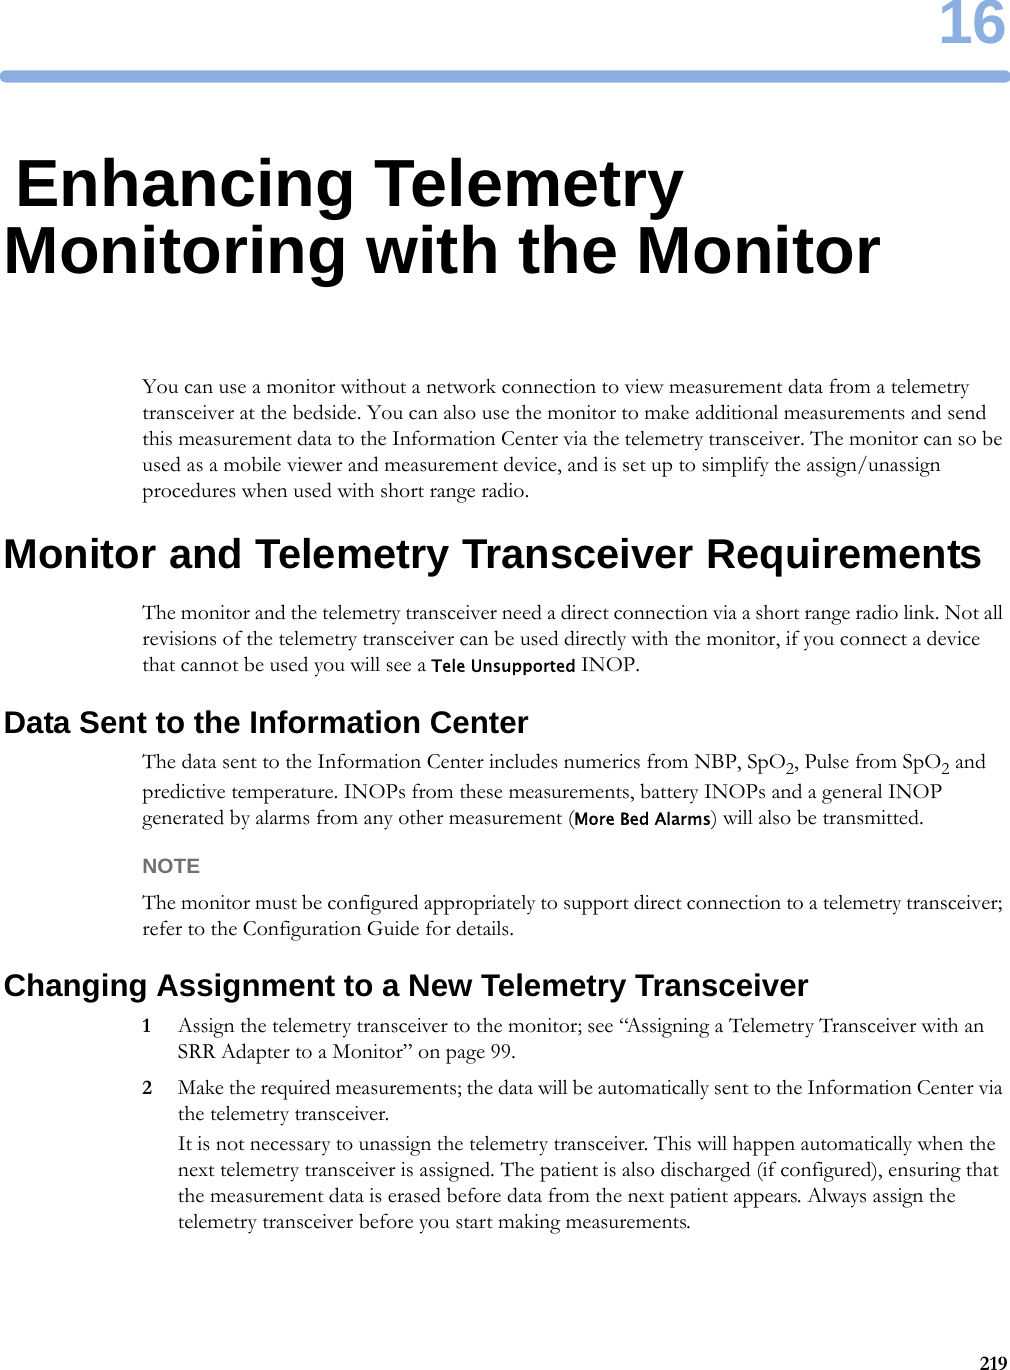 1621916Enhancing Telemetry Monitoring with the MonitorYou can use a monitor without a network connection to view measurement data from a telemetry transceiver at the bedside. You can also use the monitor to make additional measurements and send this measurement data to the Information Center via the telemetry transceiver. The monitor can so be used as a mobile viewer and measurement device, and is set up to simplify the assign/unassign procedures when used with short range radio.Monitor and Telemetry Transceiver RequirementsThe monitor and the telemetry transceiver need a direct connection via a short range radio link. Not all revisions of the telemetry transceiver can be used directly with the monitor, if you connect a device that cannot be used you will see a Tele Unsupported INOP.Data Sent to the Information CenterThe data sent to the Information Center includes numerics from NBP, SpO2, Pulse from SpO2 and predictive temperature. INOPs from these measurements, battery INOPs and a general INOP generated by alarms from any other measurement (More Bed Alarms) will also be transmitted.NOTEThe monitor must be configured appropriately to support direct connection to a telemetry transceiver; refer to the Configuration Guide for details.Changing Assignment to a New Telemetry Transceiver1Assign the telemetry transceiver to the monitor; see “Assigning a Telemetry Transceiver with an SRR Adapter to a Monitor” on page 99.2Make the required measurements; the data will be automatically sent to the Information Center via the telemetry transceiver.It is not necessary to unassign the telemetry transceiver. This will happen automatically when the next telemetry transceiver is assigned. The patient is also discharged (if configured), ensuring that the measurement data is erased before data from the next patient appears. Always assign the telemetry transceiver before you start making measurements.